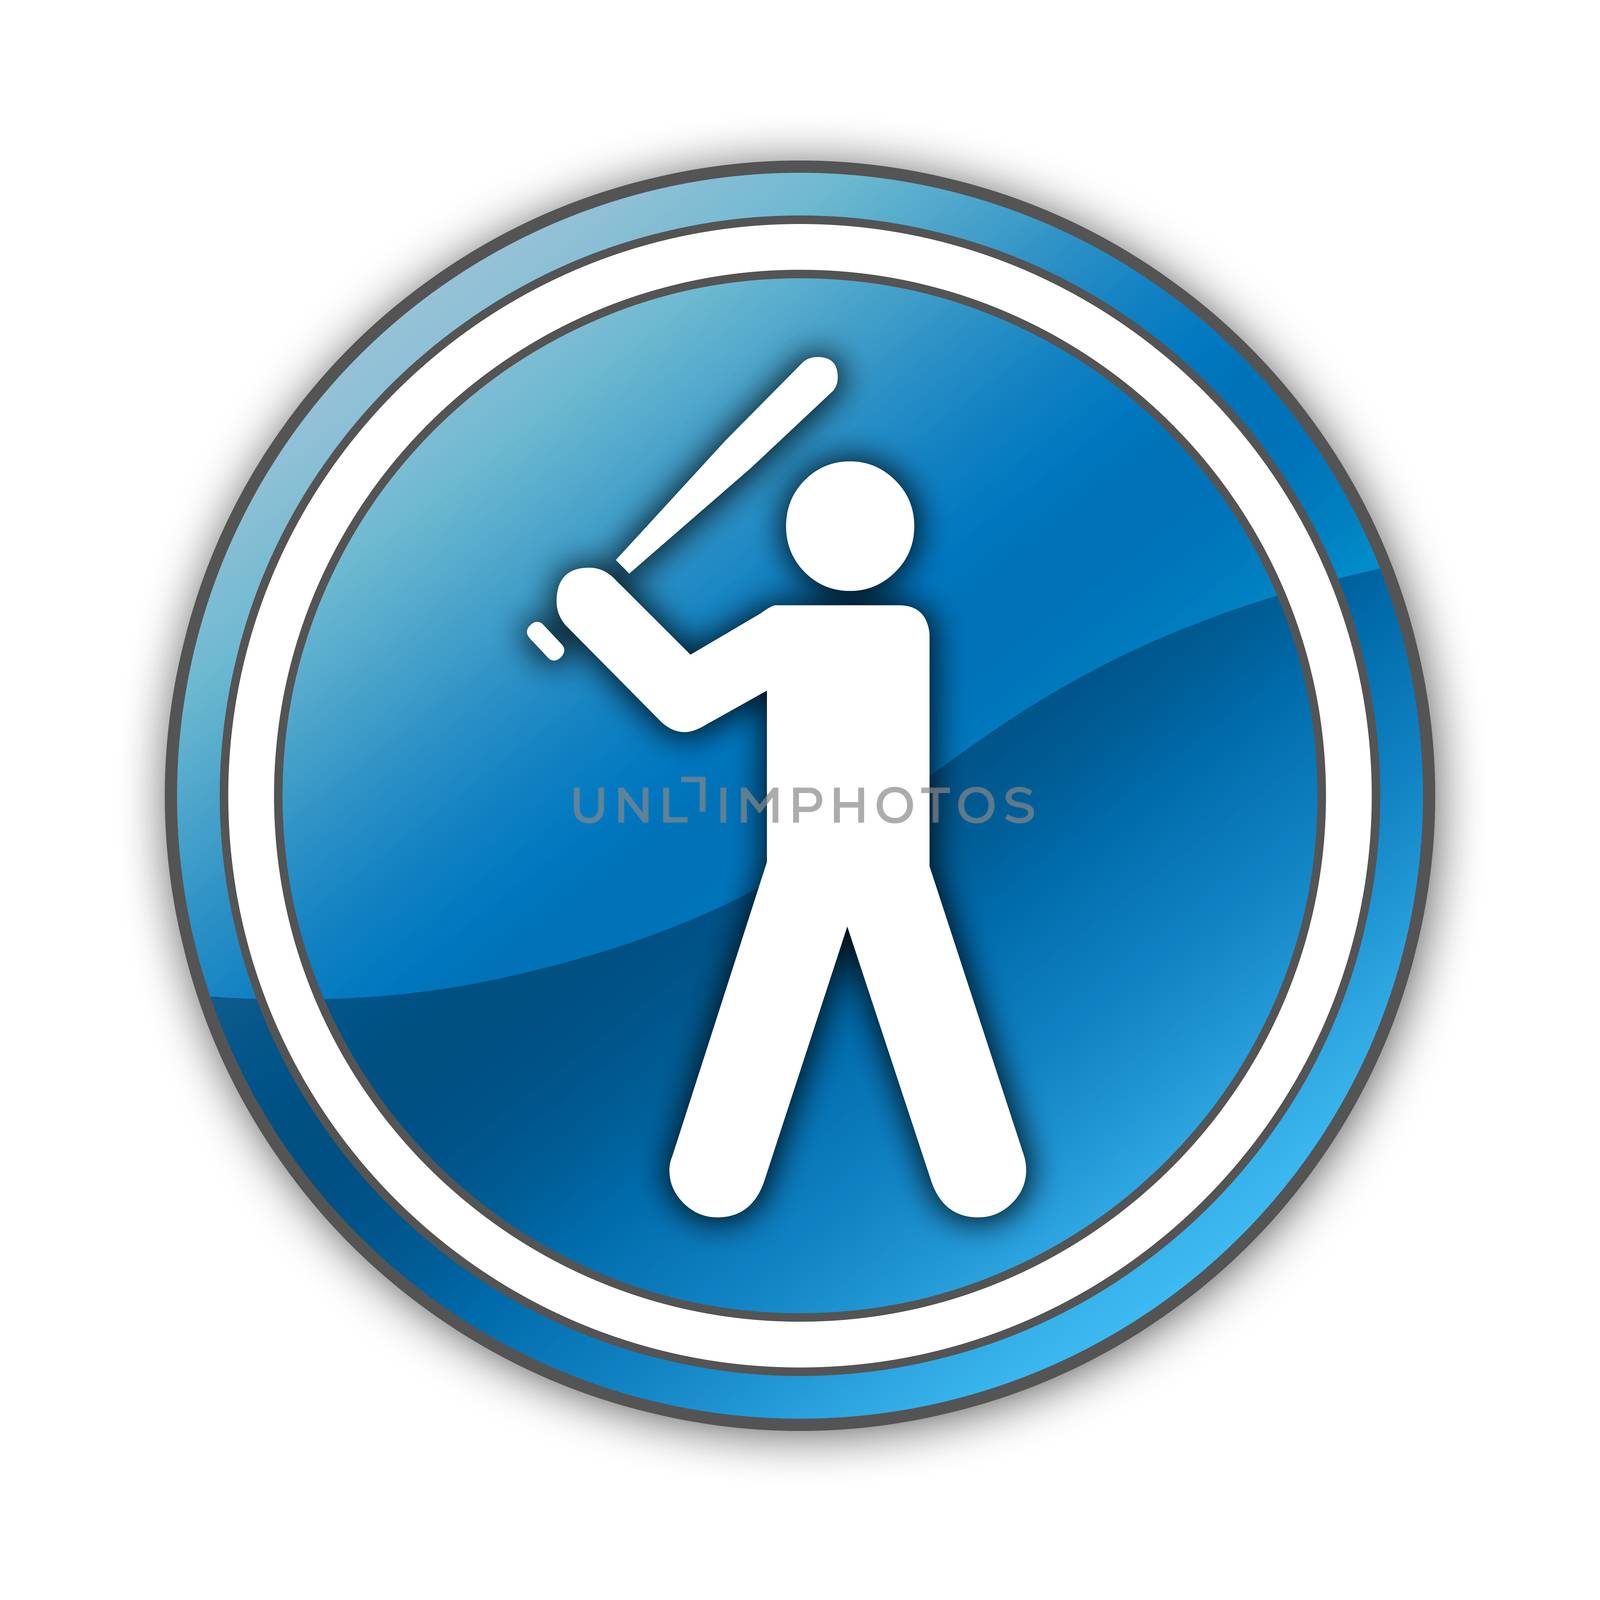 Icon, Button, Pictogram Baseball by mindscanner